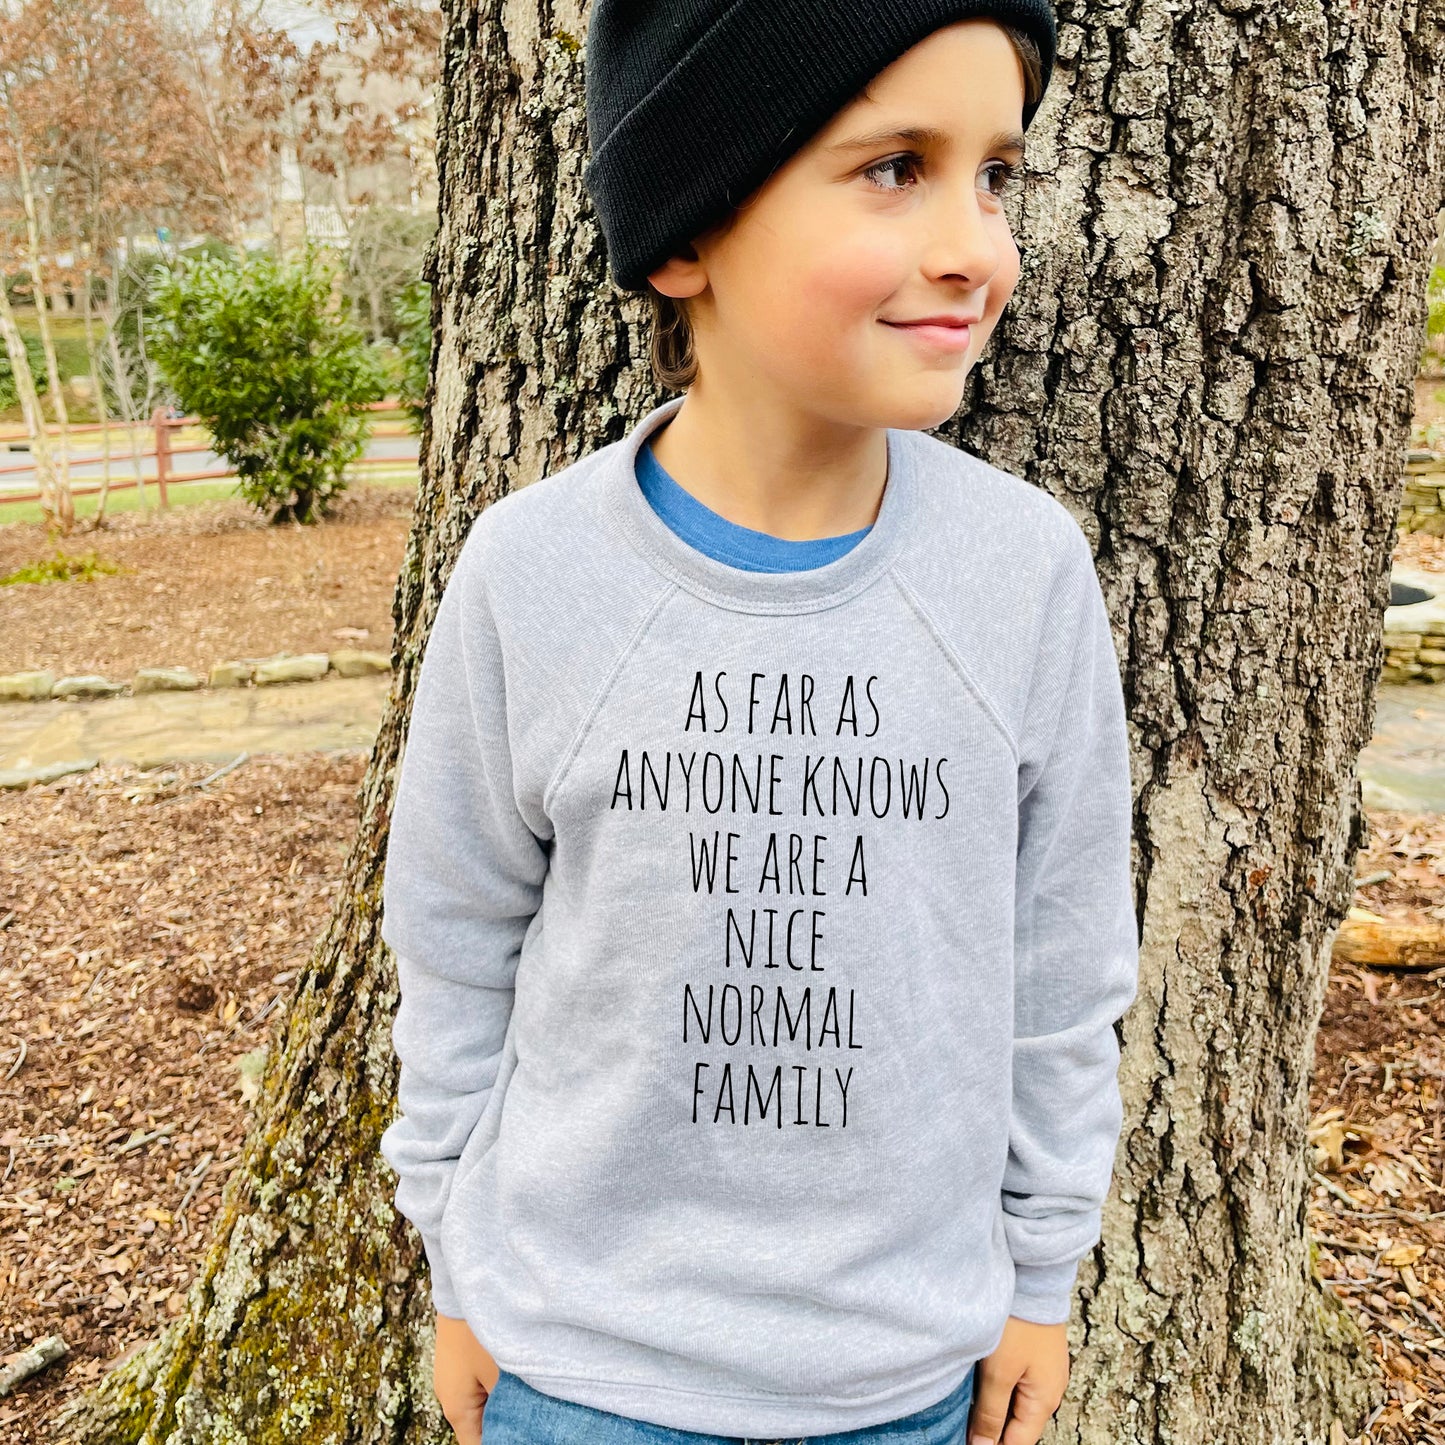 As Far As Anyone Knows We Are A Nice Normal Family - Kid's Sweatshirt - Heather Gray or Mauve